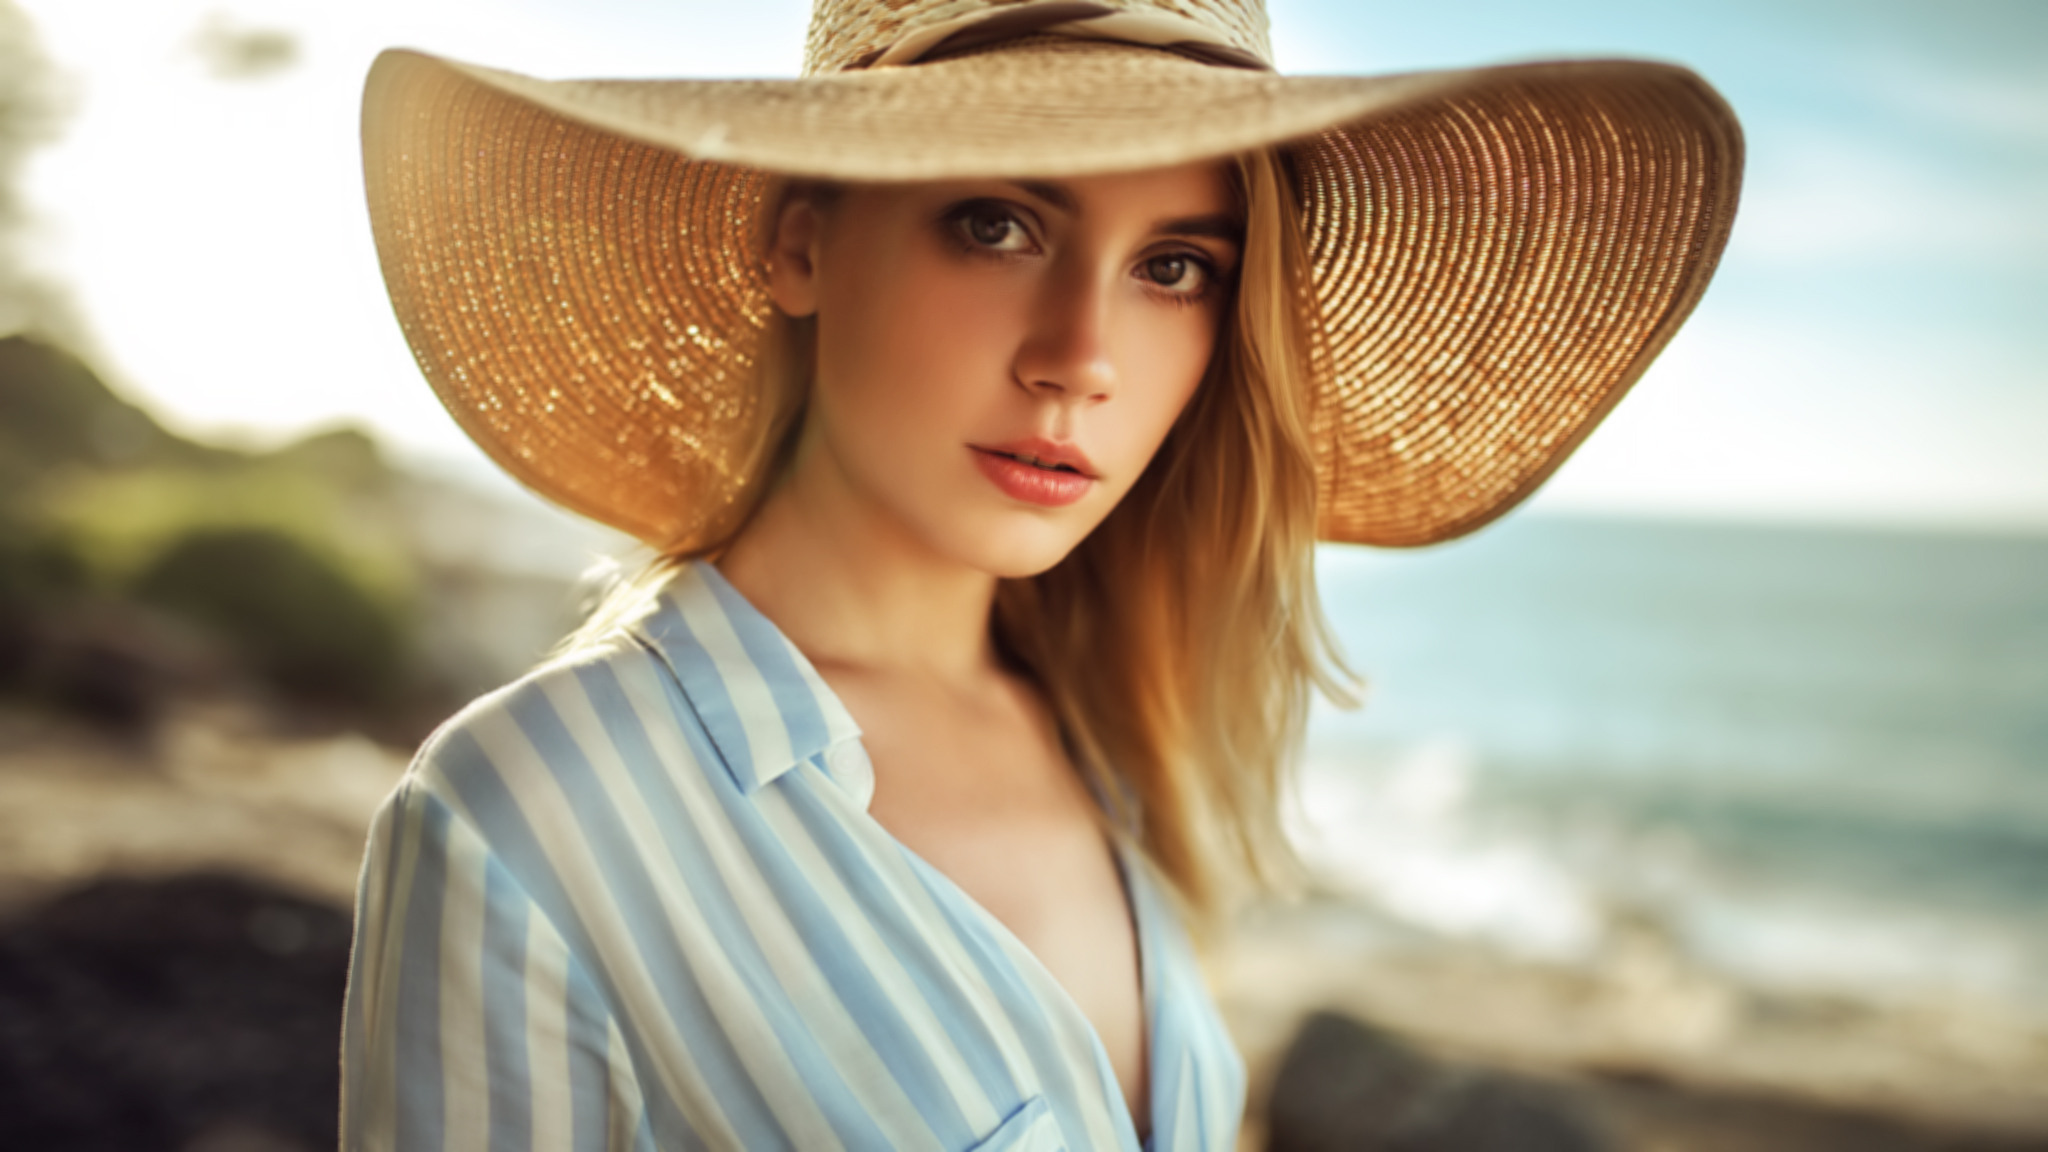 Beautiful Girl With Hat - HD Wallpaper 